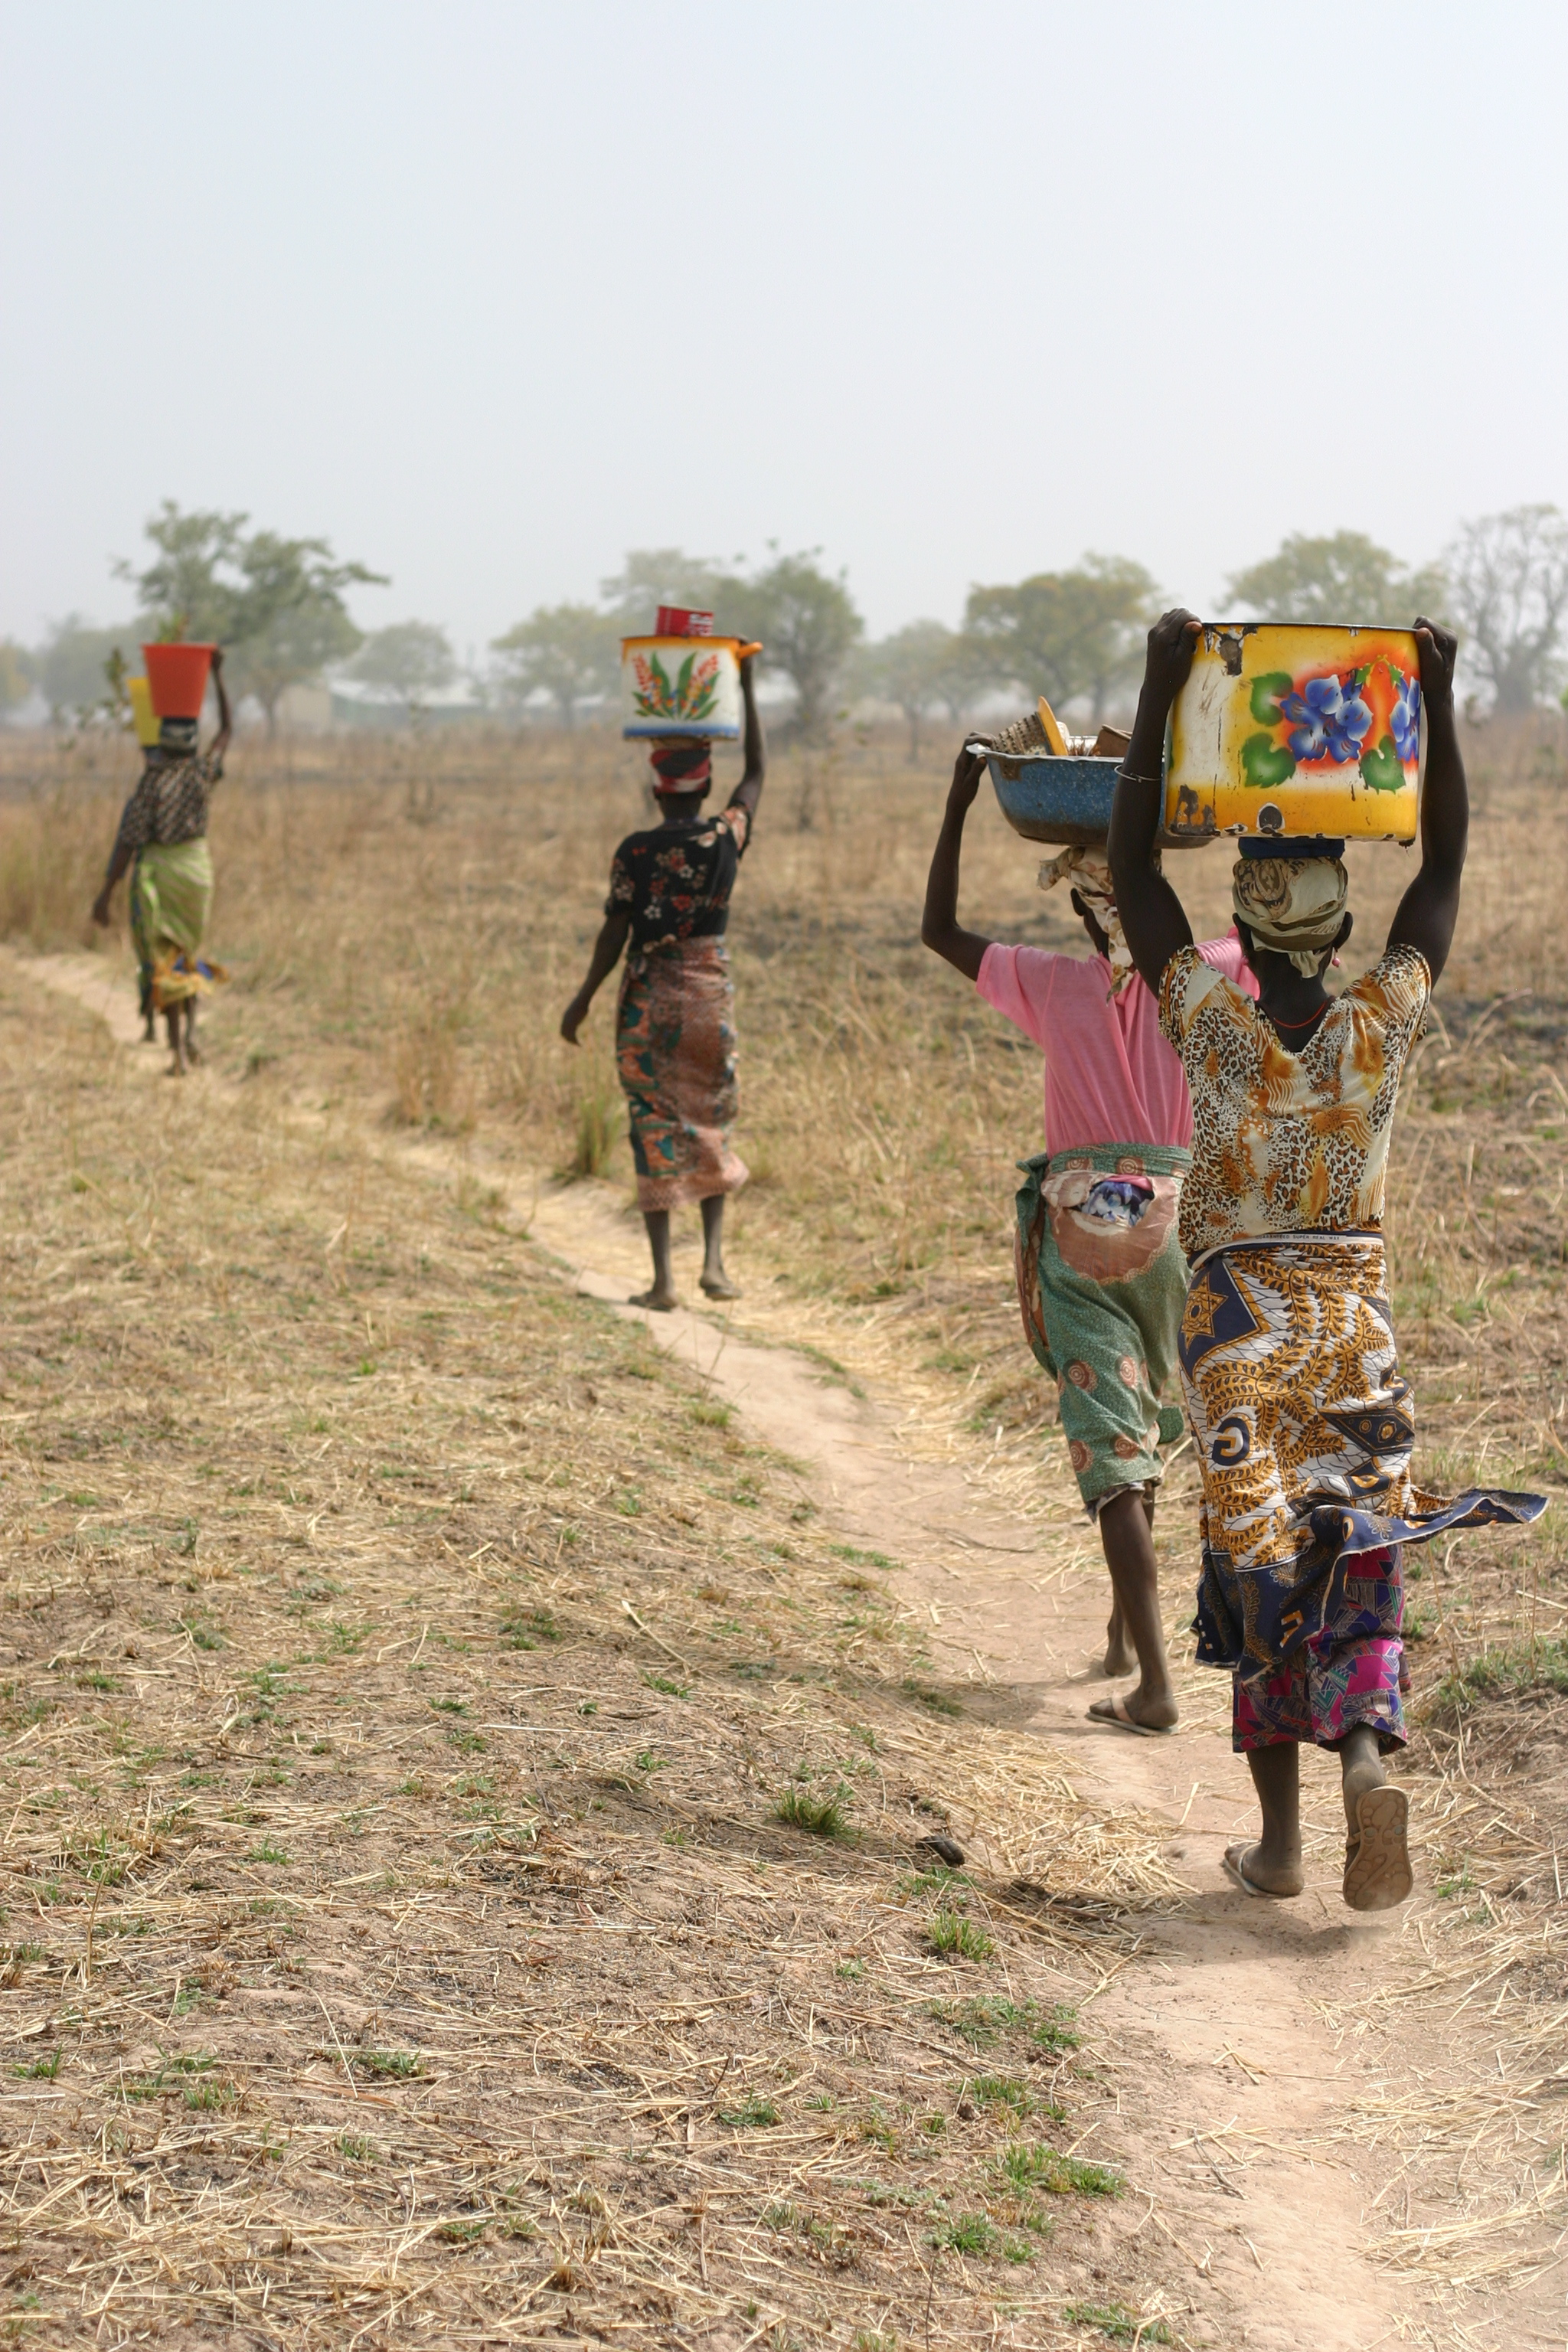 Women in Northern Ghana carry the responsibility of fetching water for household chores. Credit: Catherine Ryan Gregory